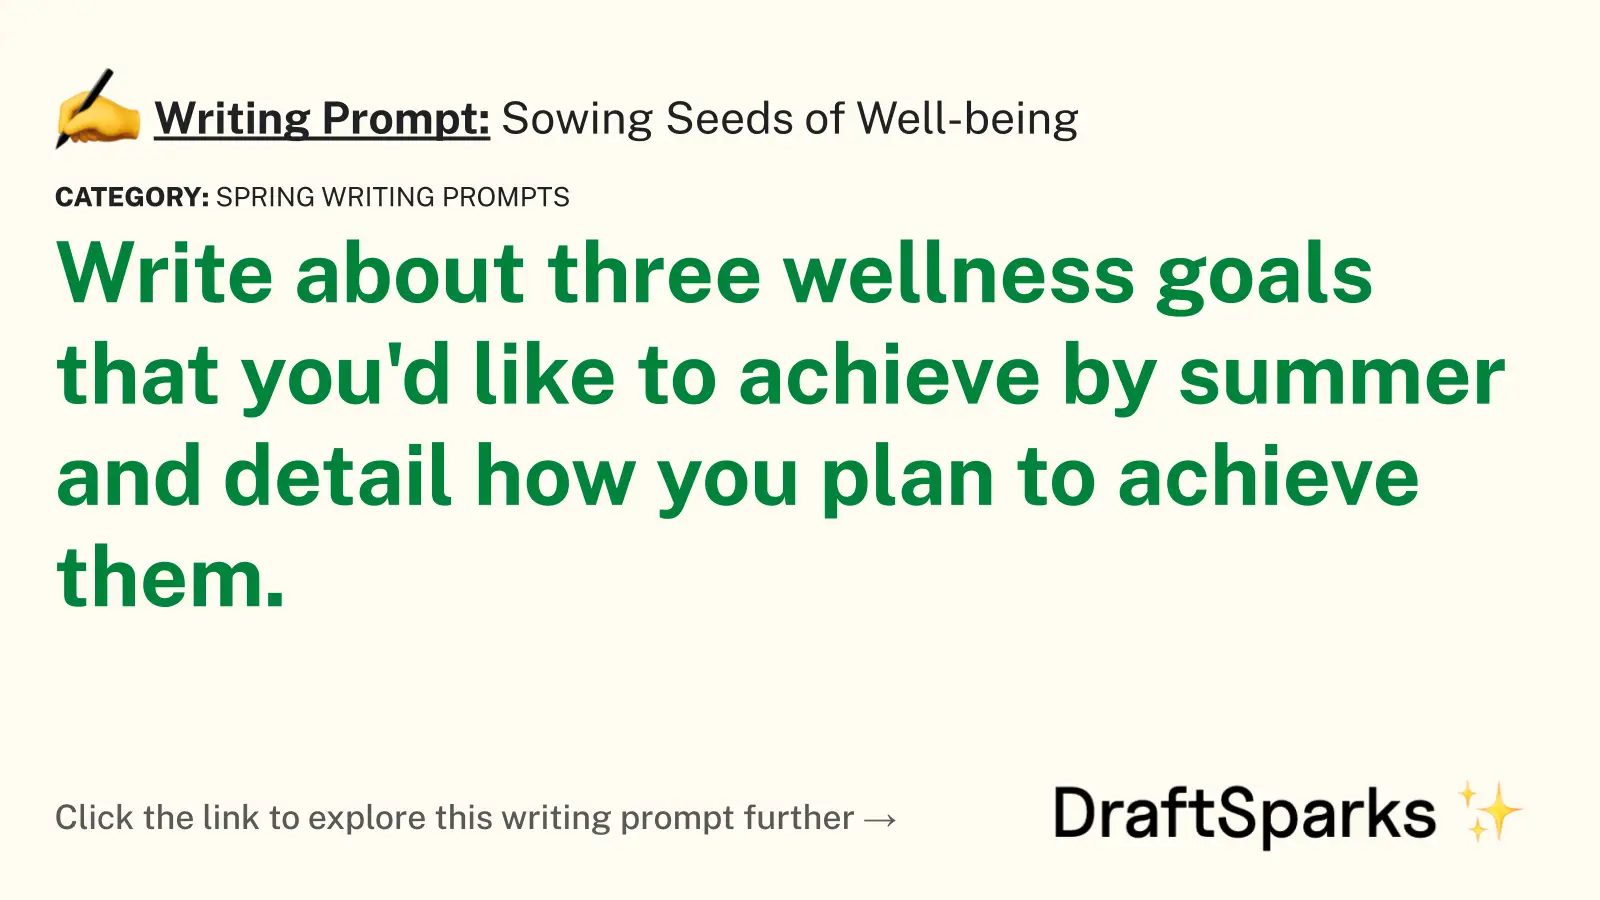 Sowing Seeds of Well-being